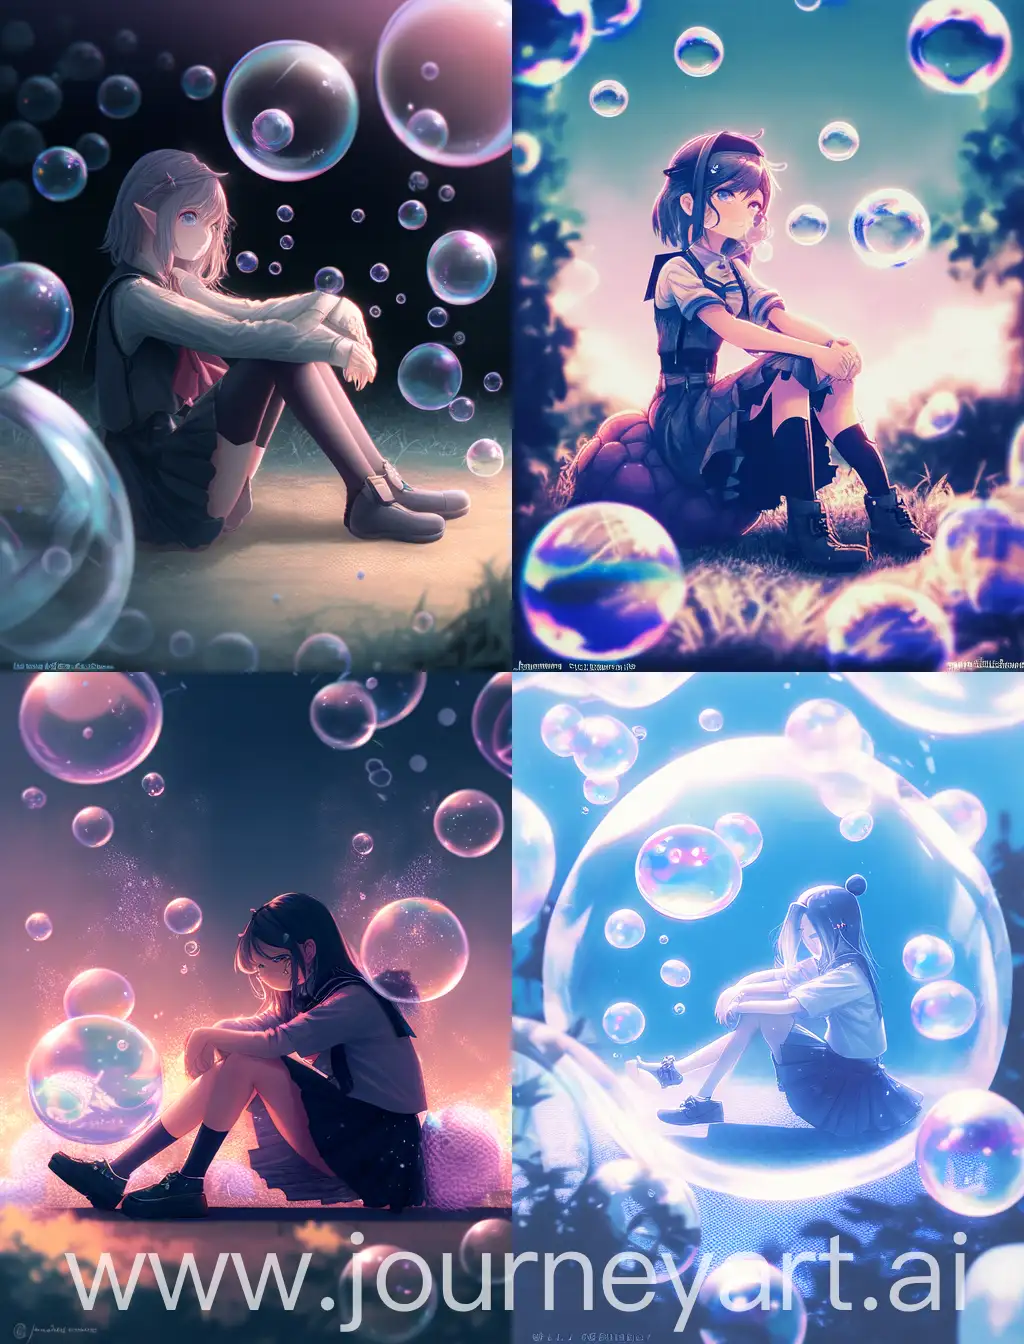 Enchanting-Girl-Surrounded-by-Bubble-Goth-Magic